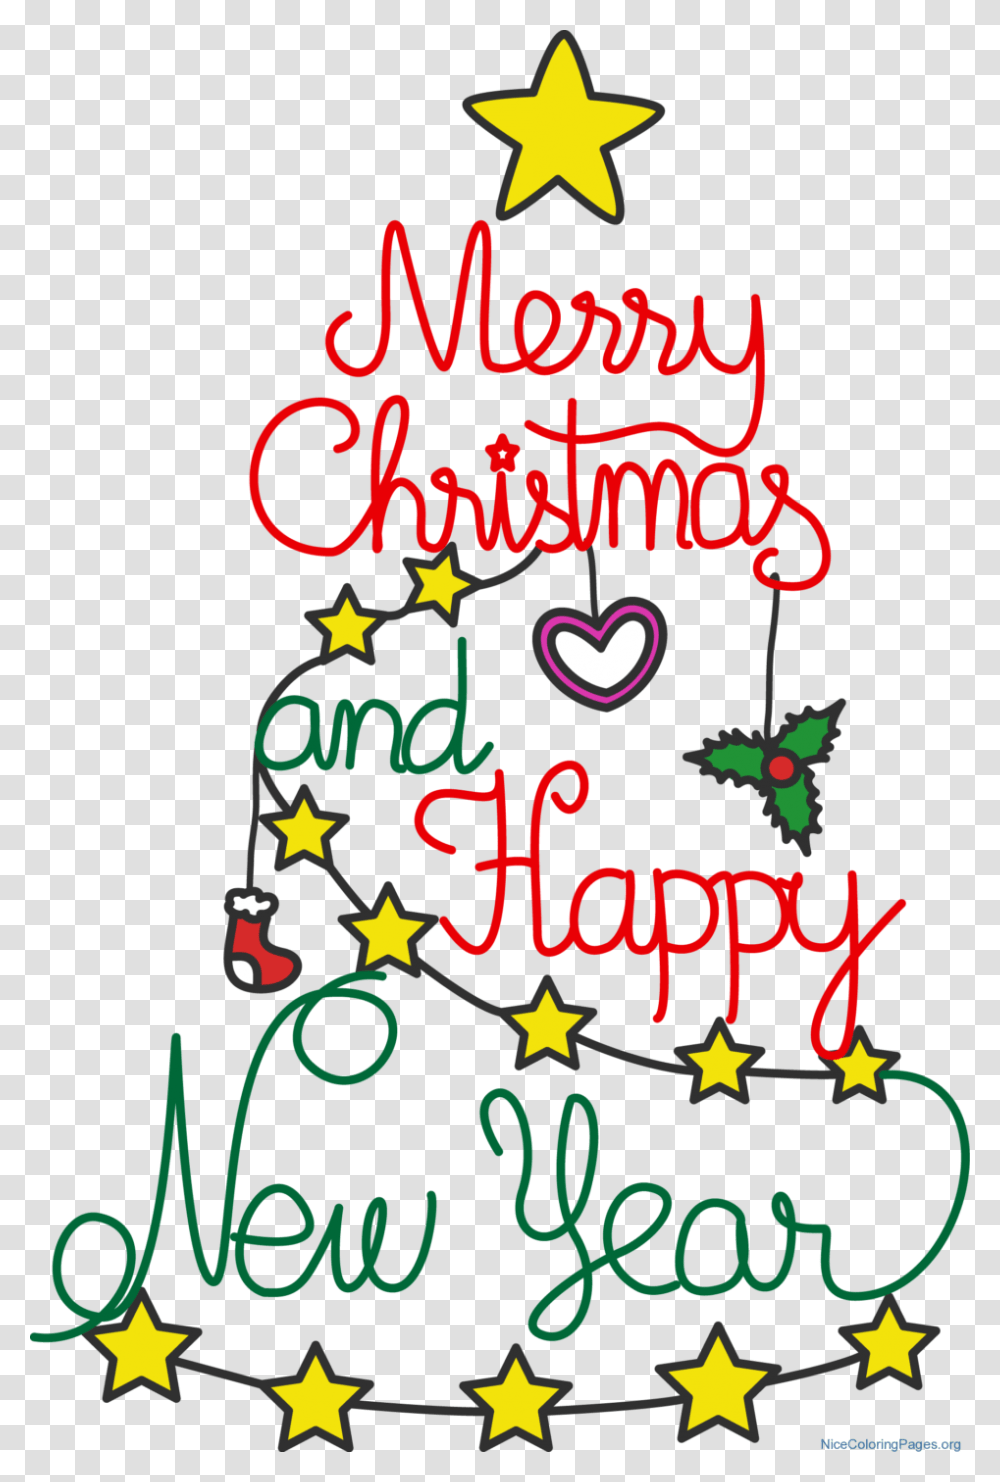 Happy New Year Clip Art Downloads Free Images Religious, Alphabet, Diwali, Greeting Card Transparent Png